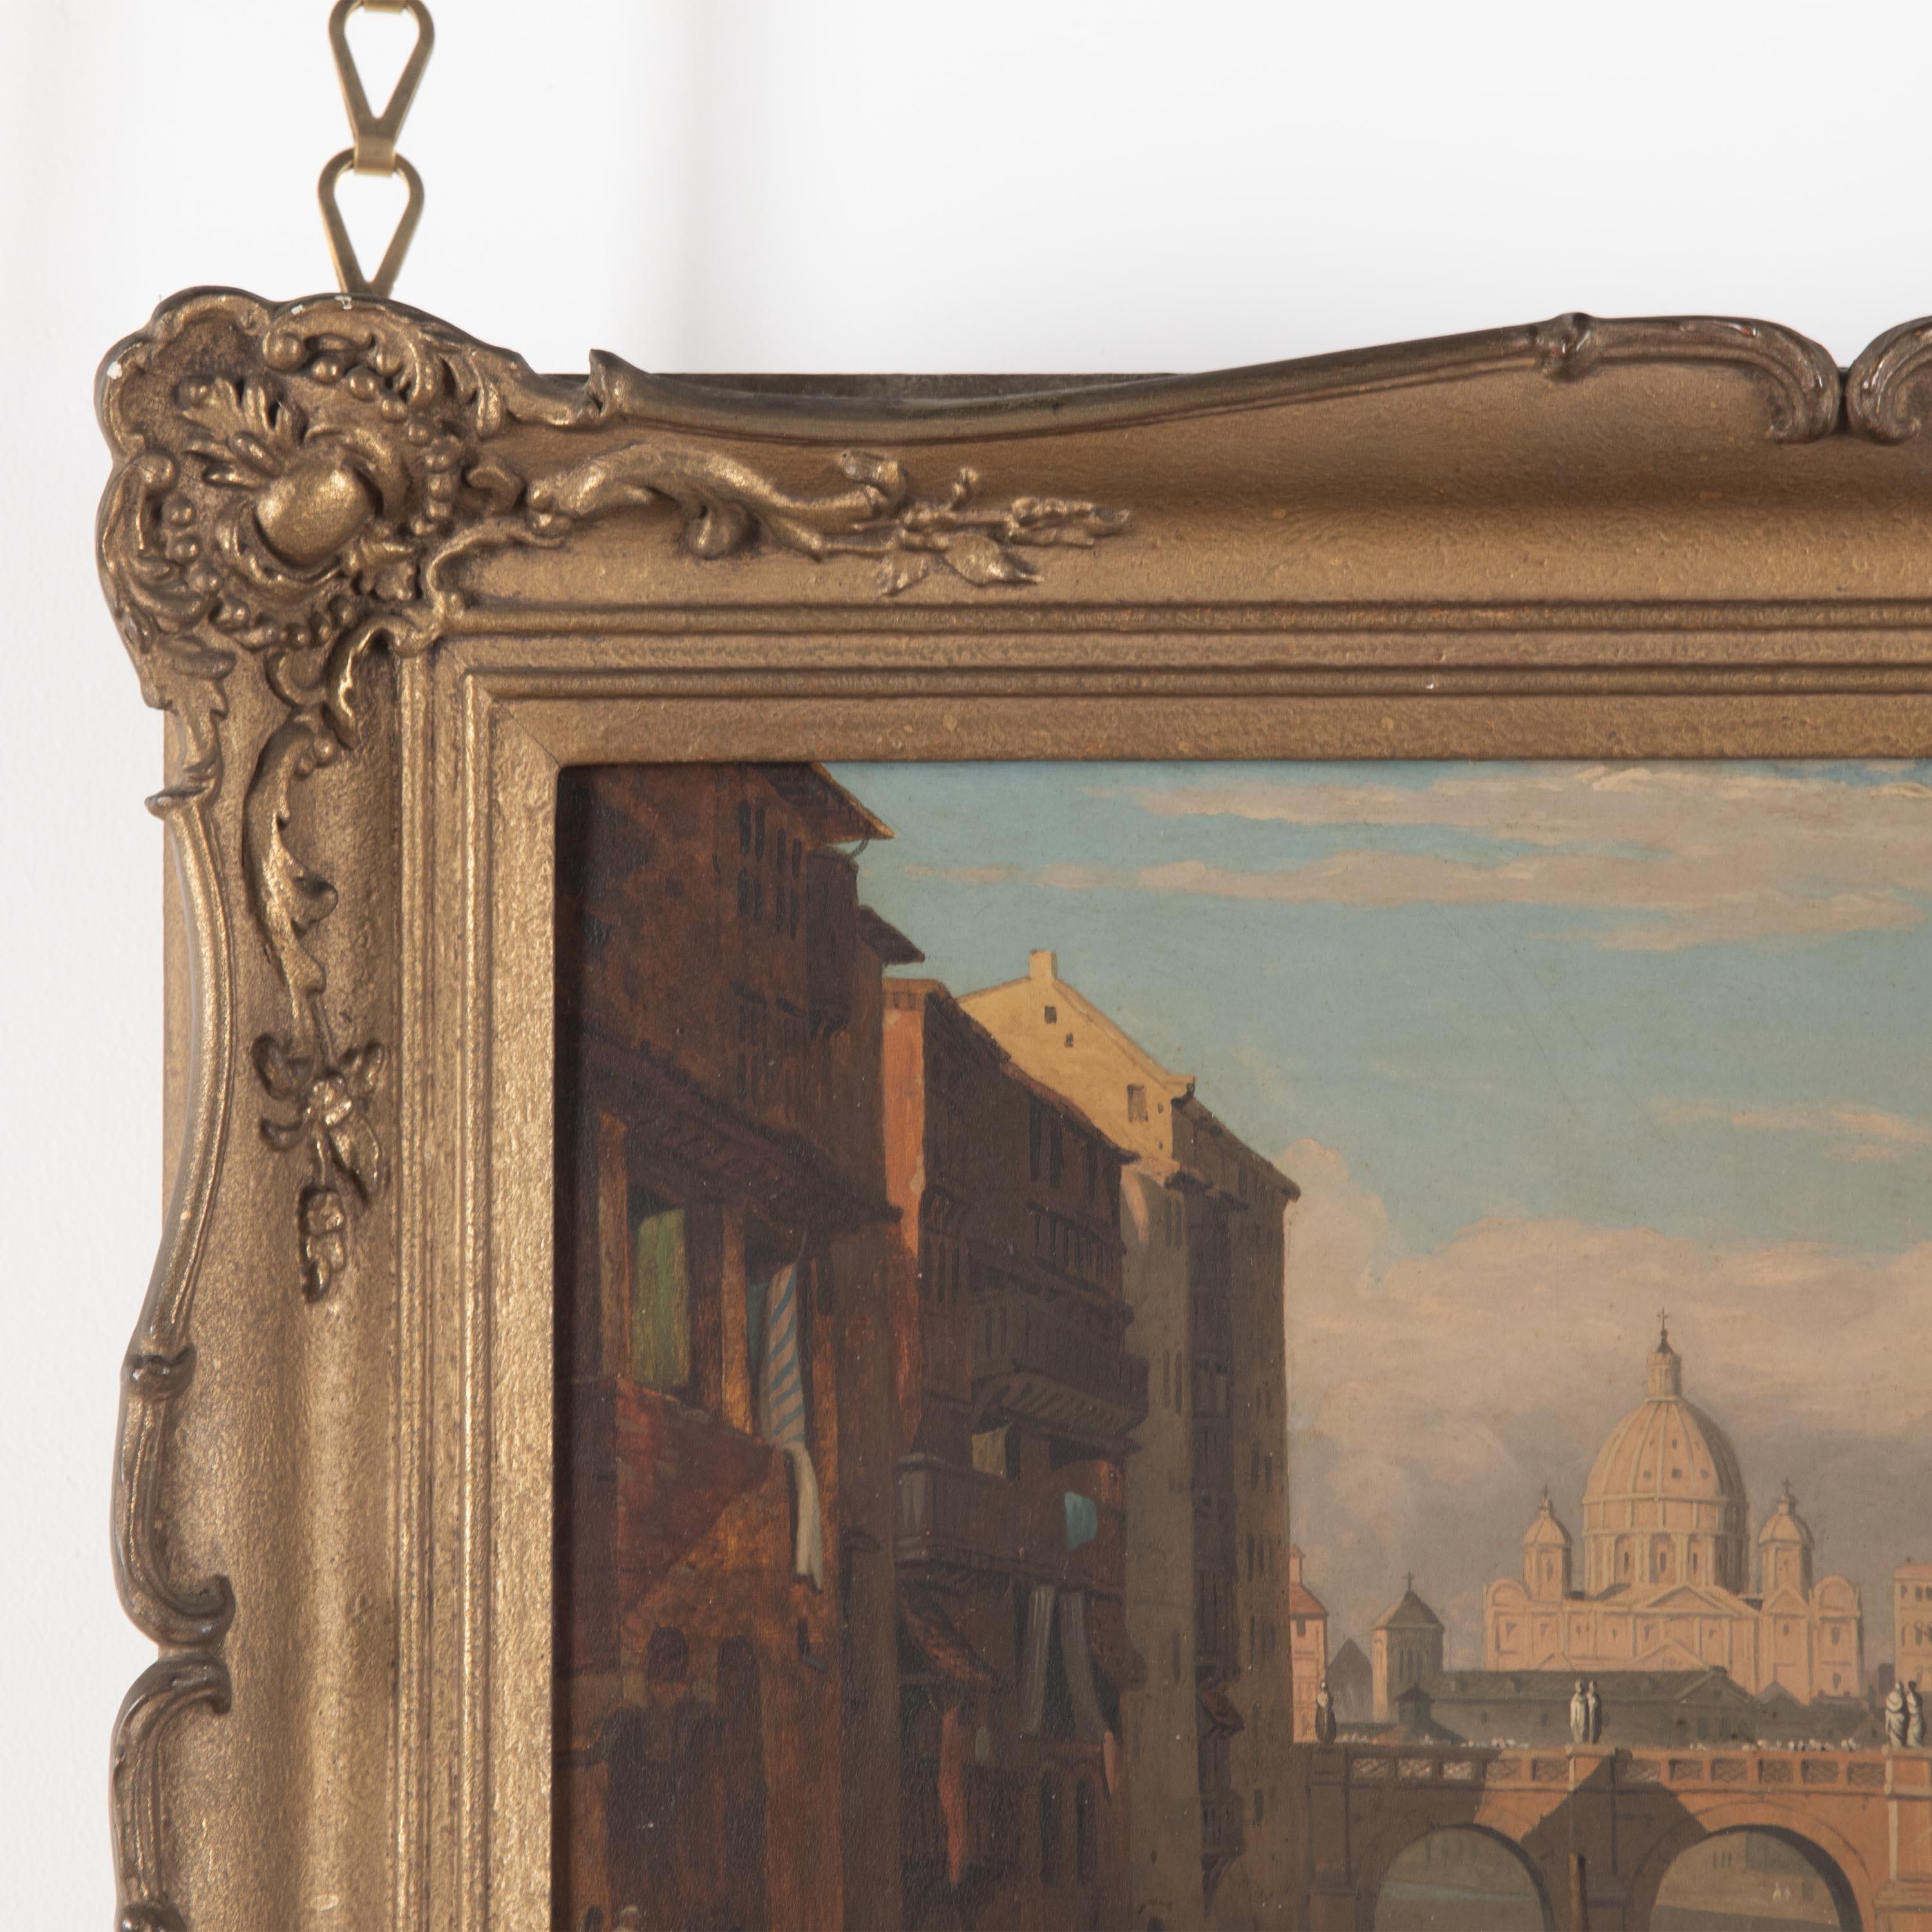 Italian School early 19th Century, View of Rome, with Bridge and the Castle St. Angelo and St Peter's Cathedral in the distance. Oil on board. In carved giltwood frame. Circa 1830

H: 41 cm (16 1/8